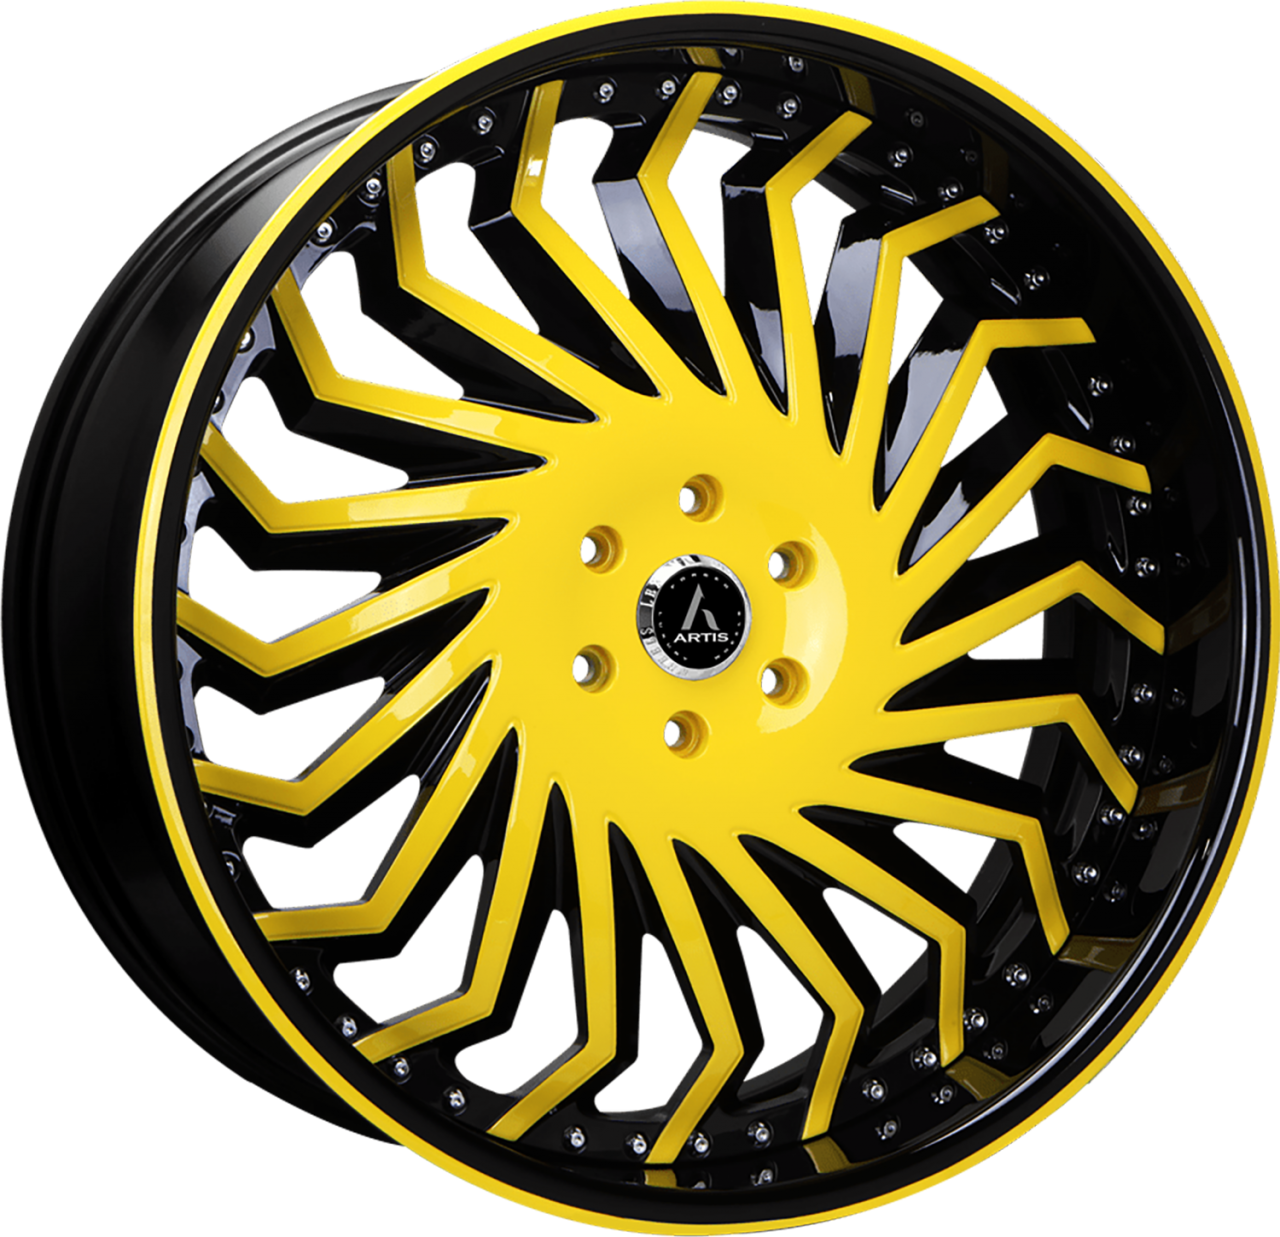 Artis Forged Hype wheel with Custom Yellow and Black finish